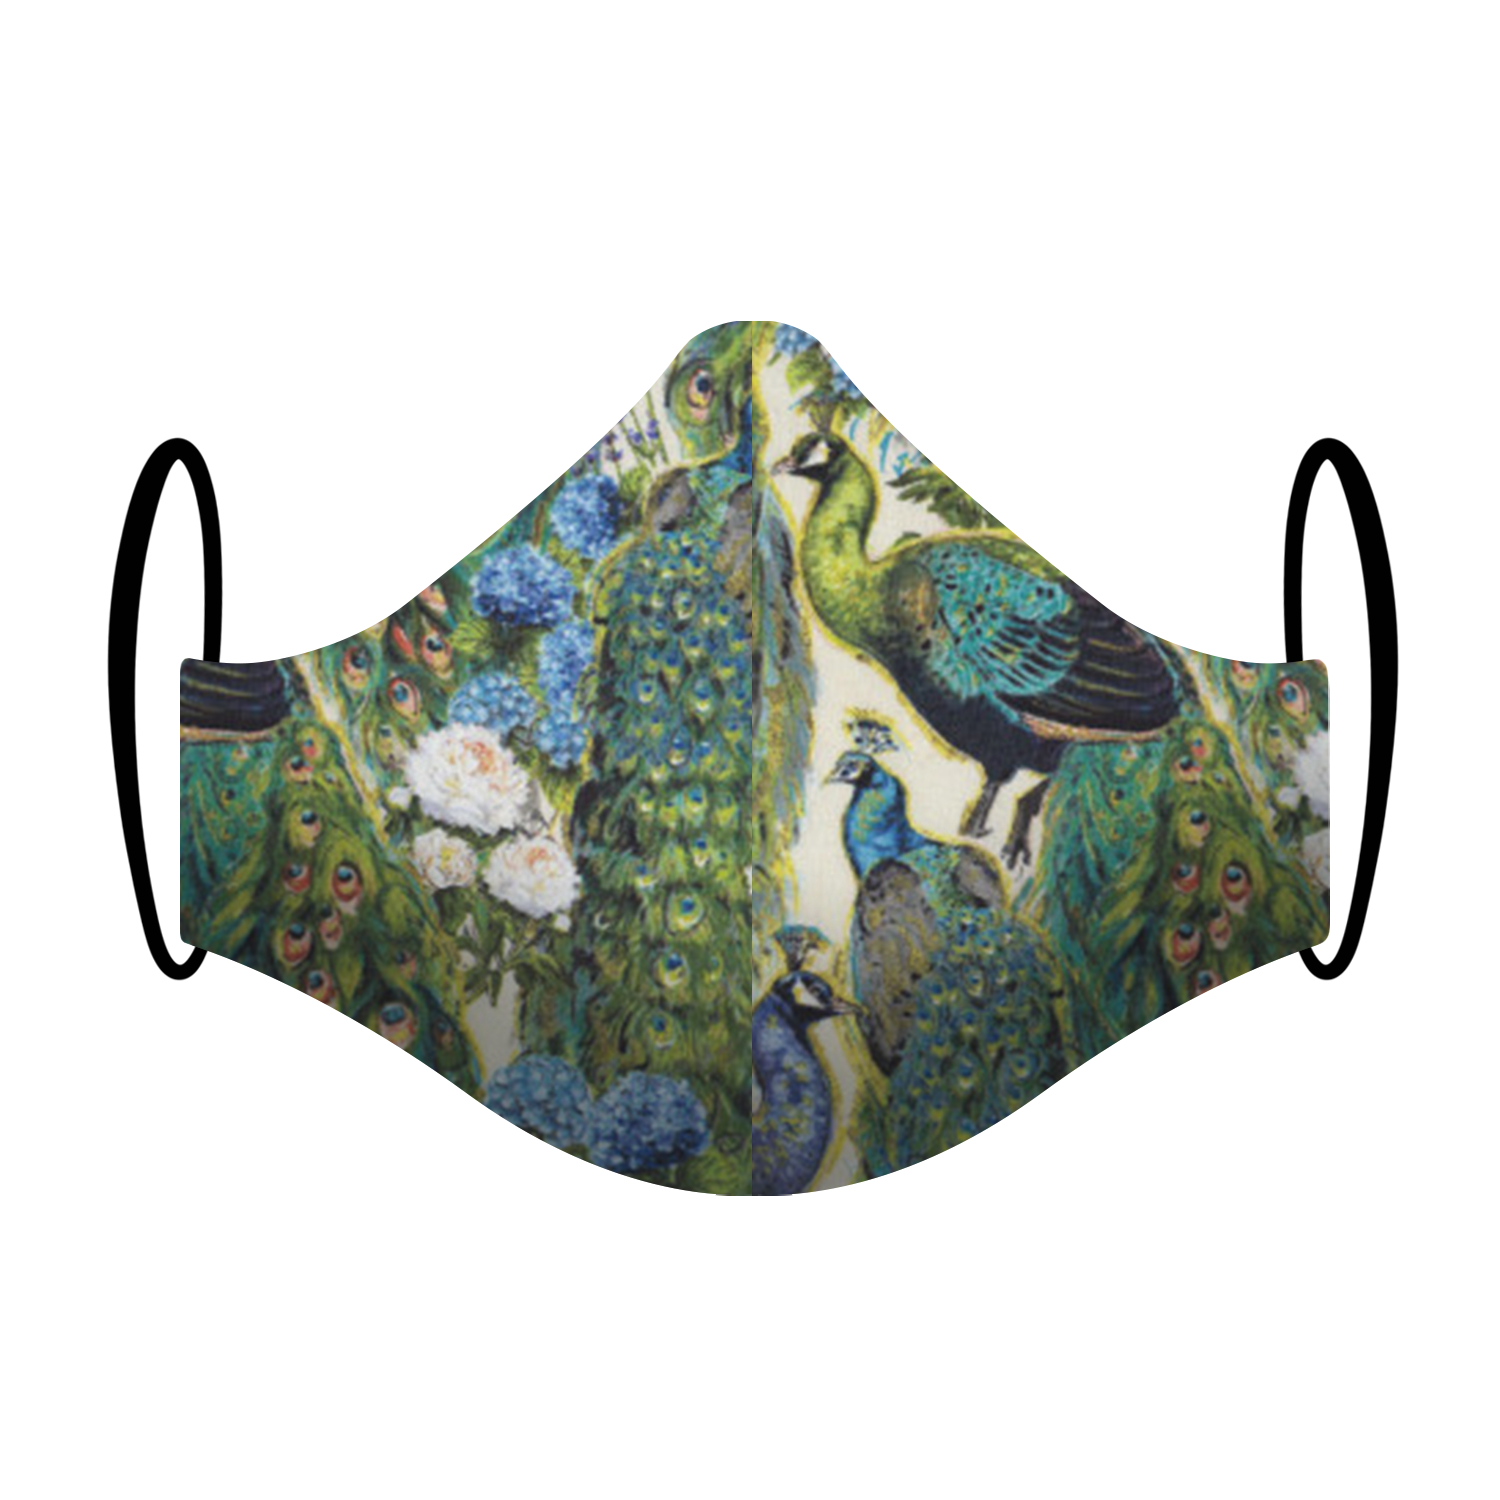 Triple layered face mask made in Melbourne Australia from cotton and poplin featuring a unique luxurious peacock print